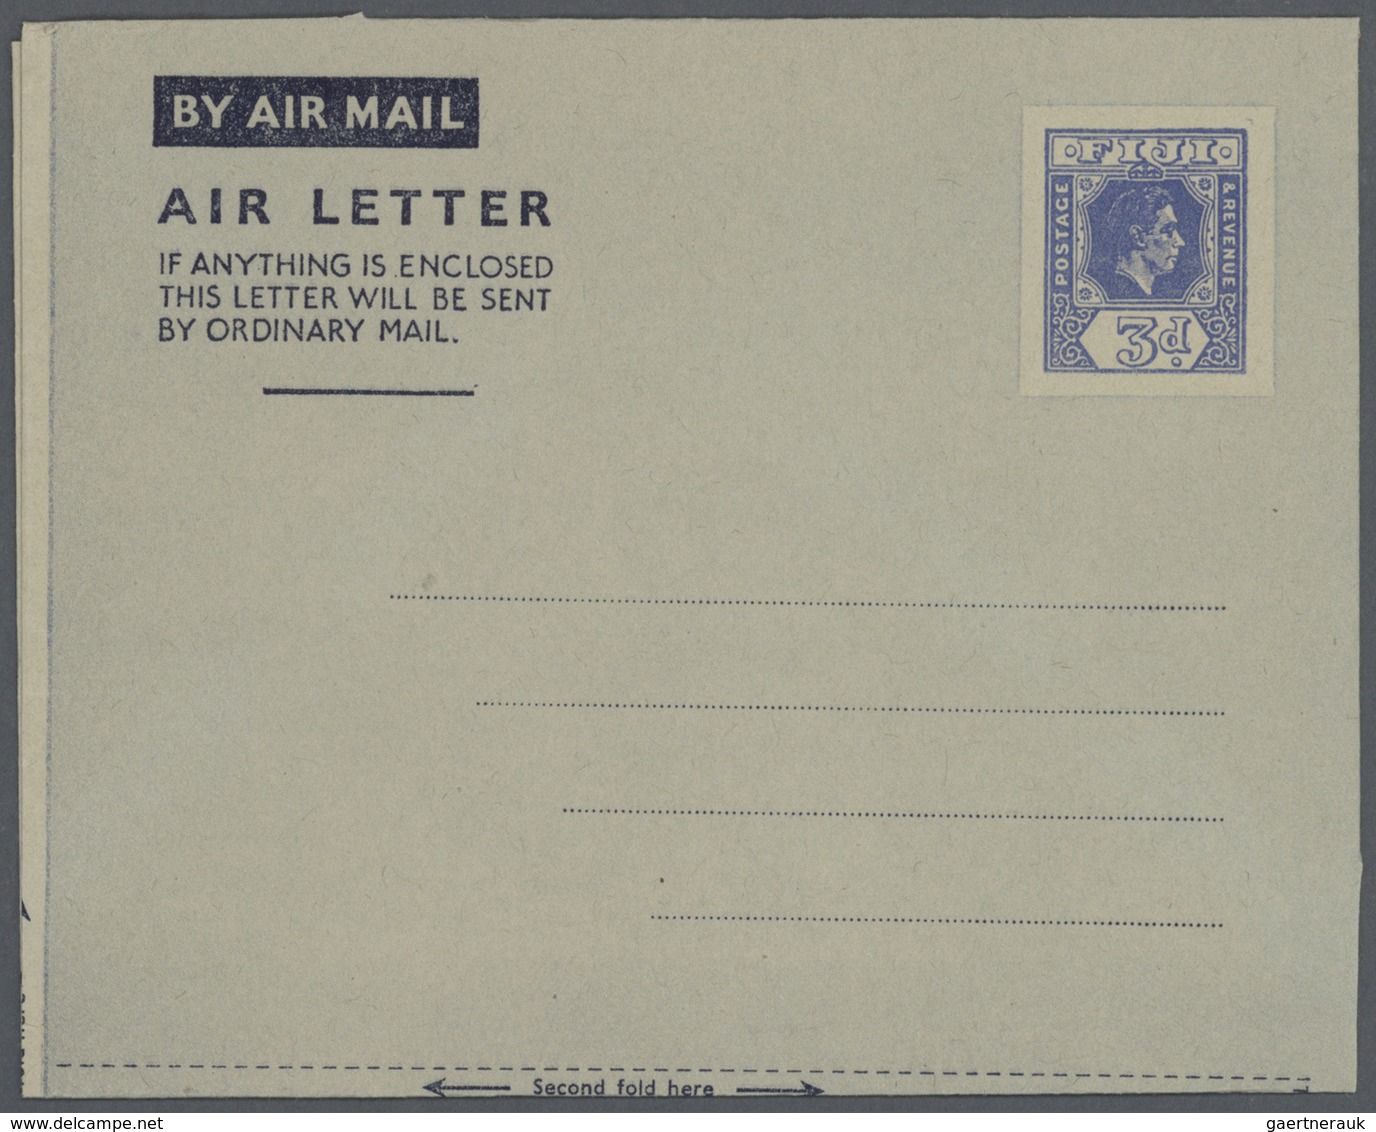 22566 Fiji-Inseln: 1944/1990 (ca.), accumulation with about 540 unused and used/CTO airletters and AEROGRA